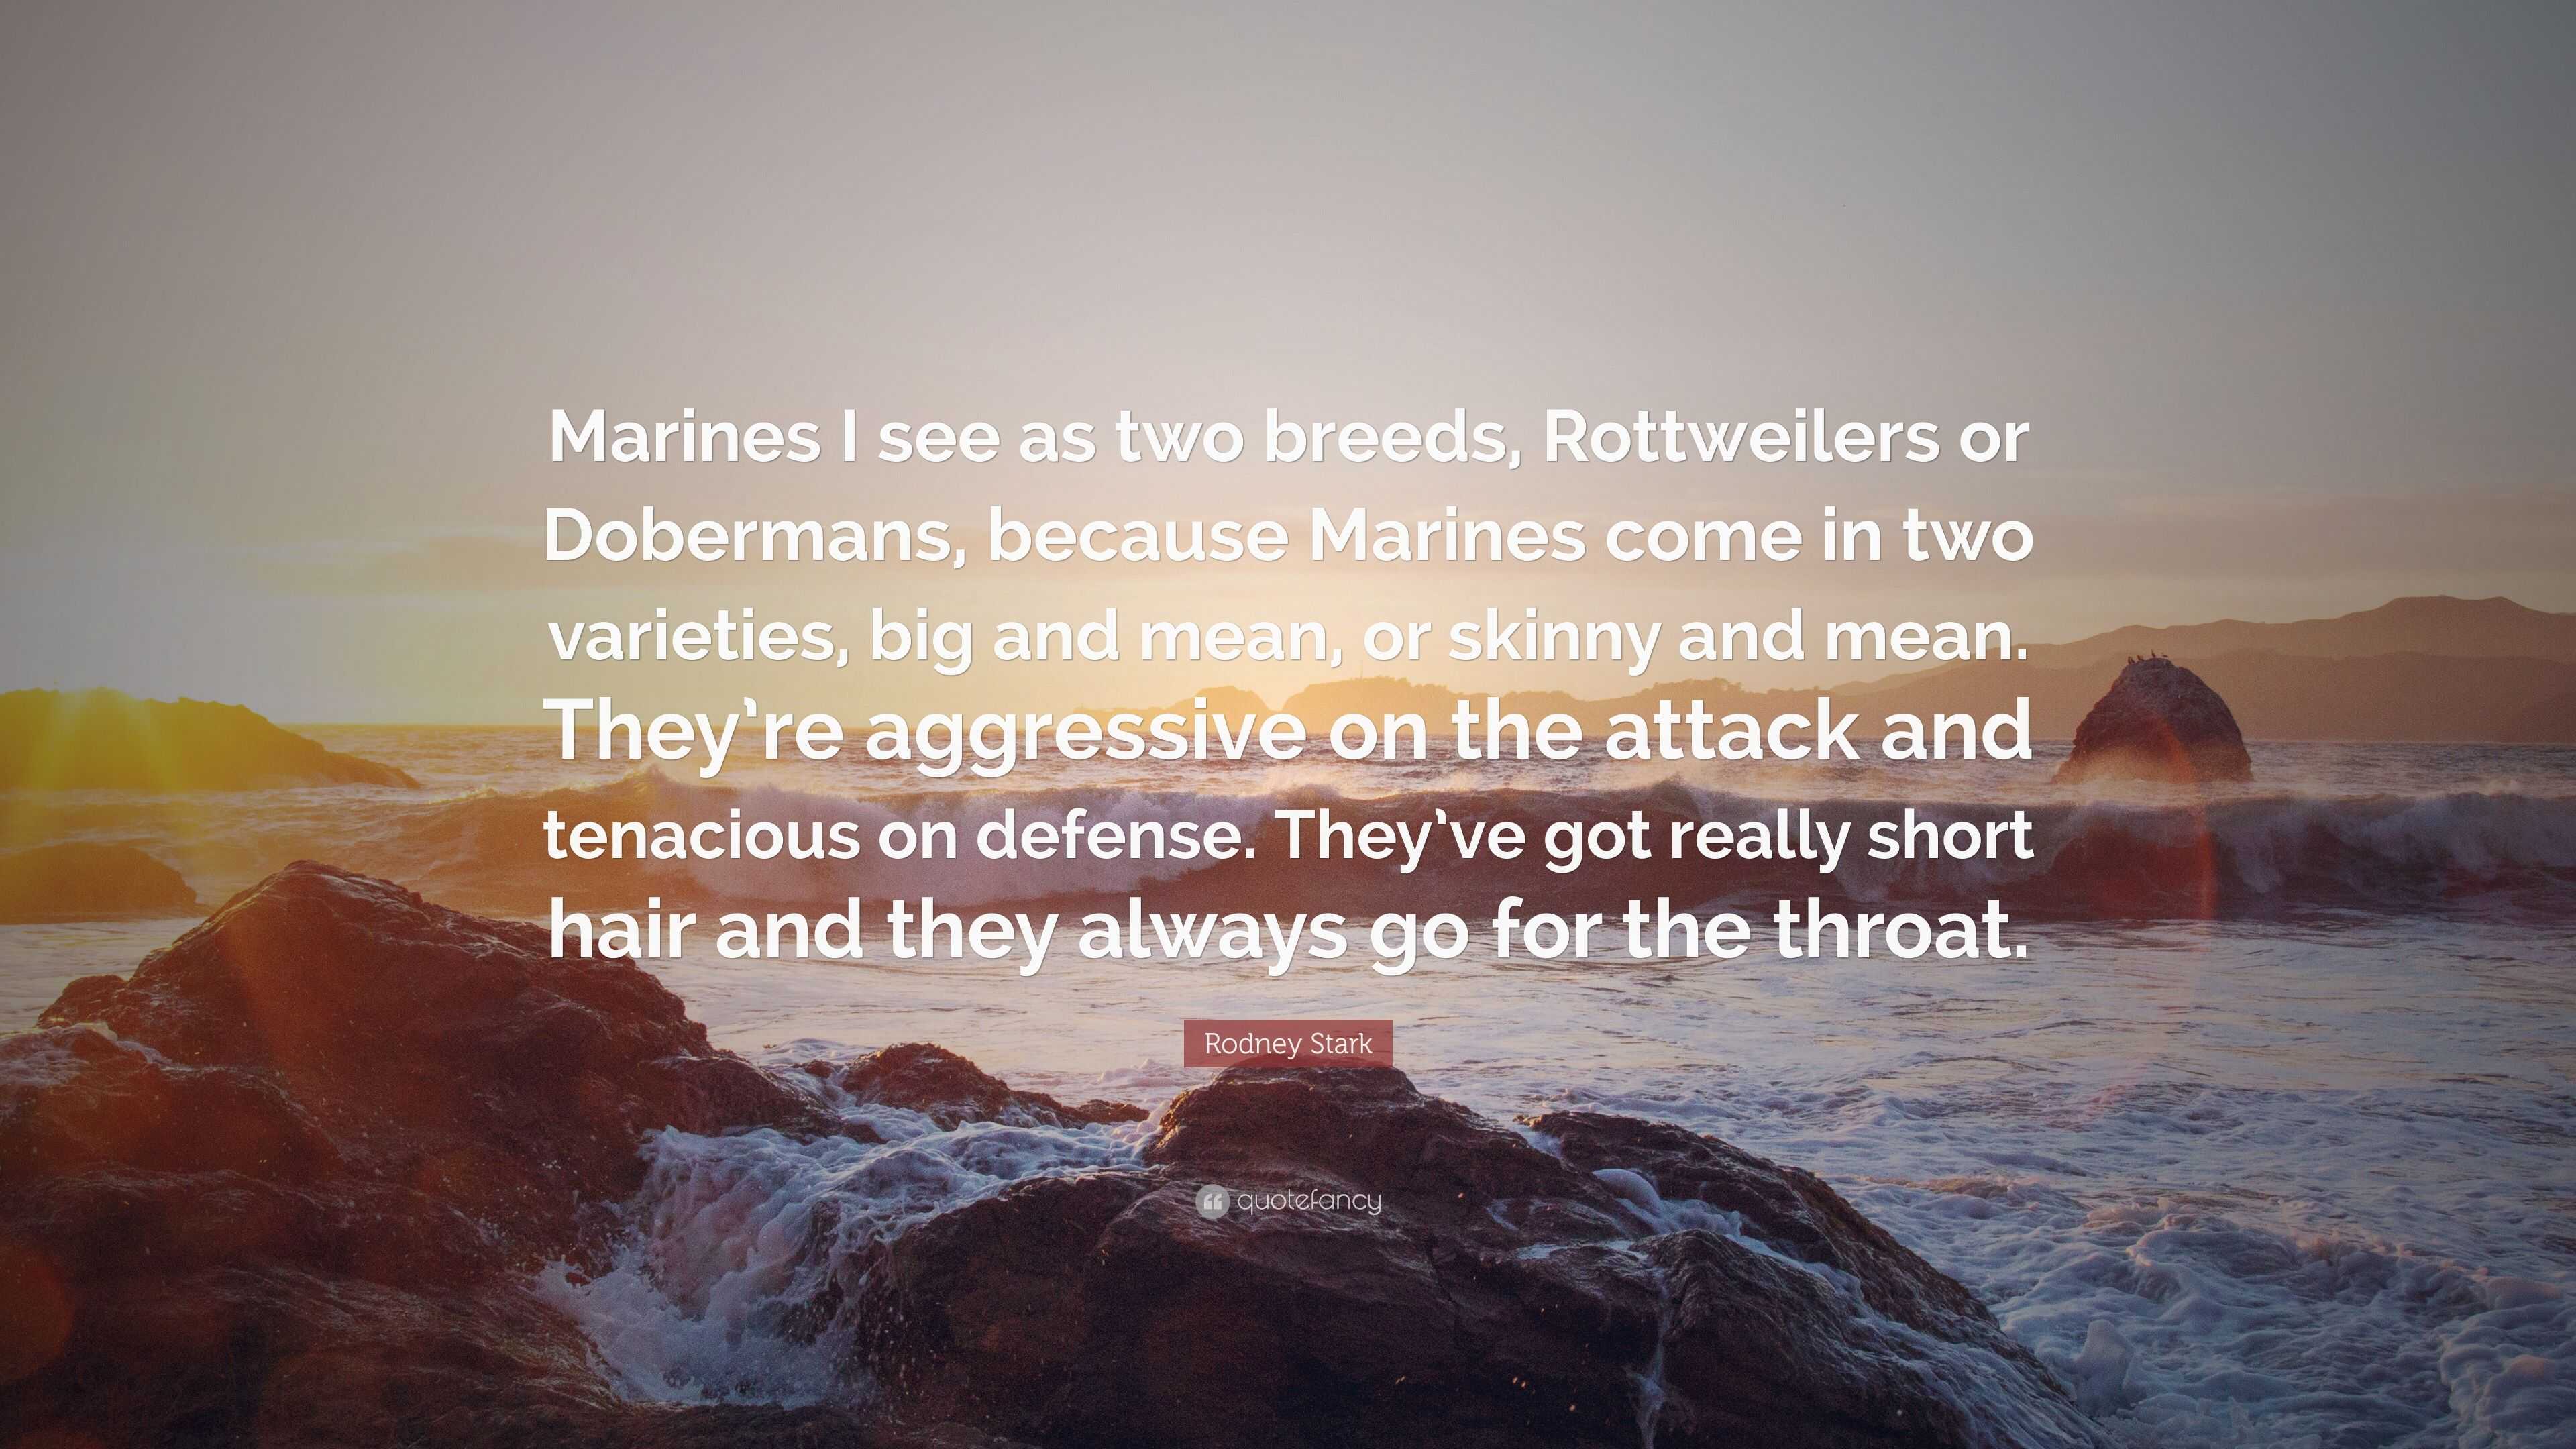 Rodney Stark Quote: “Marines I see as two breeds, Rottweilers or